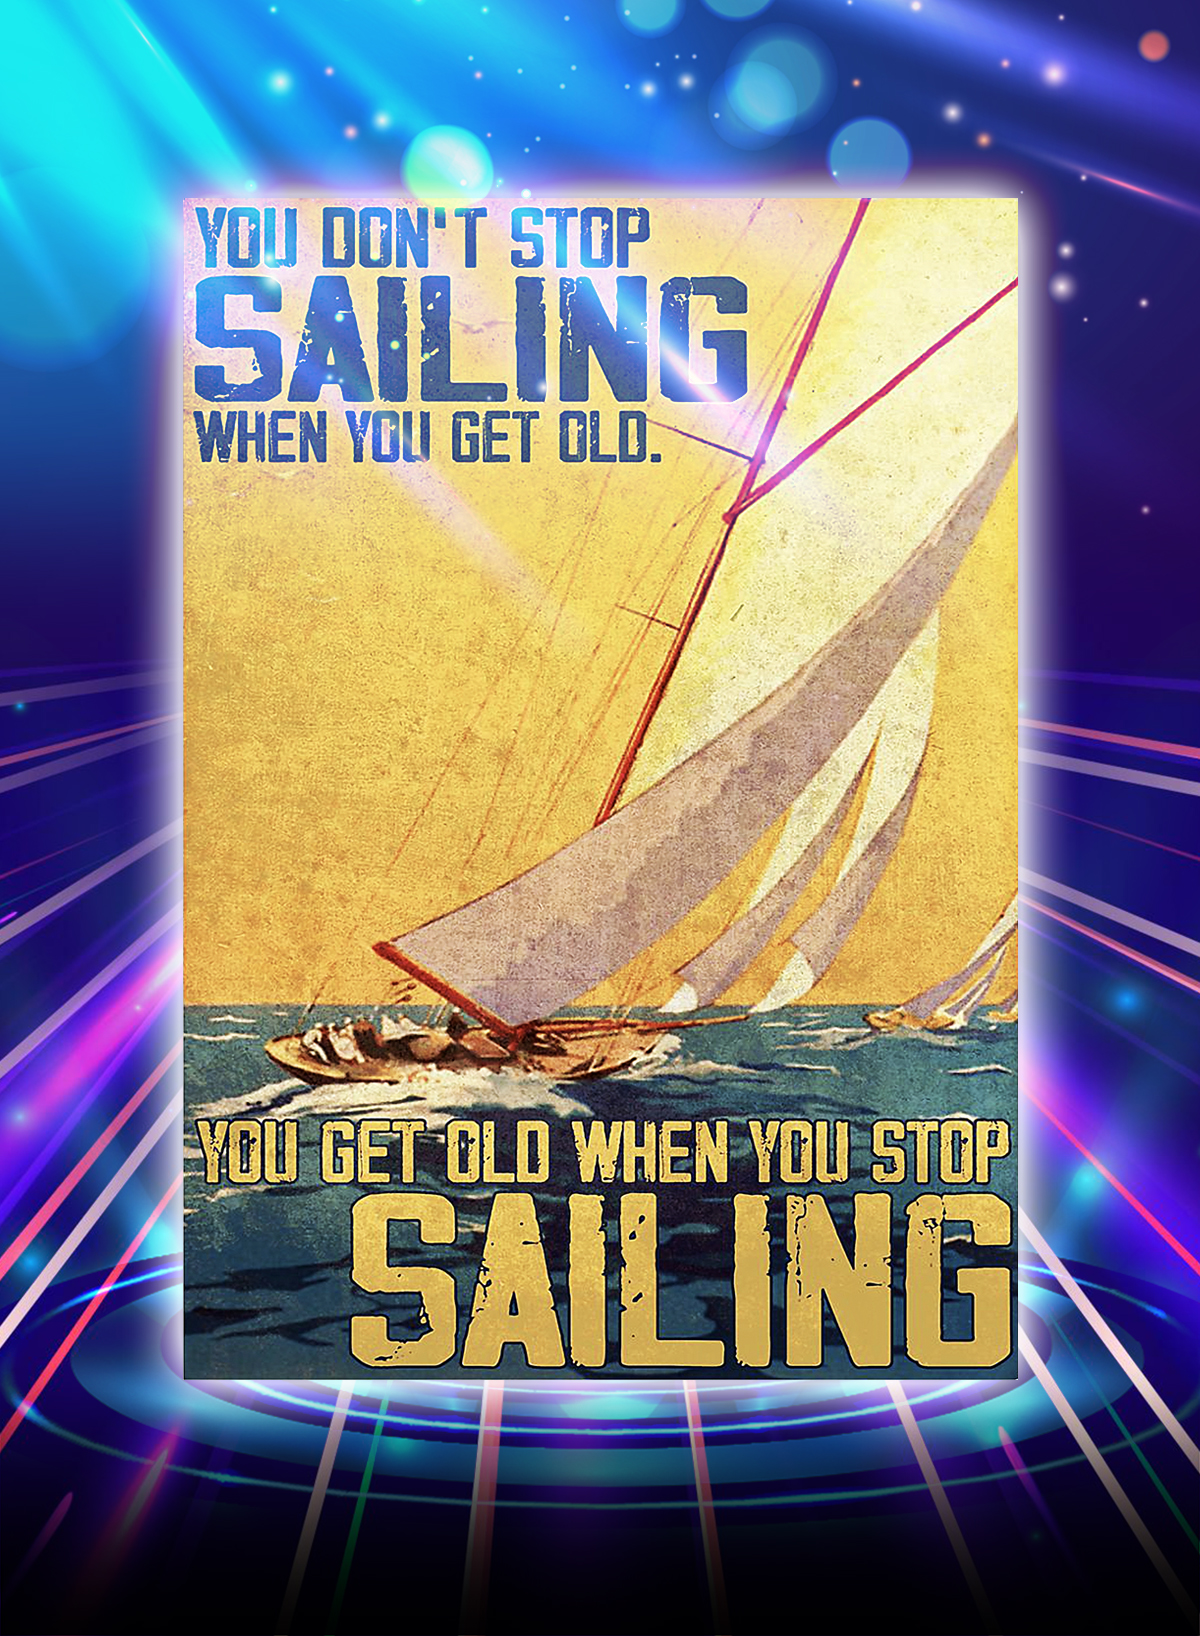 You don’t stop sailing when you get old you get old when you stop sailing poster – Saleoff